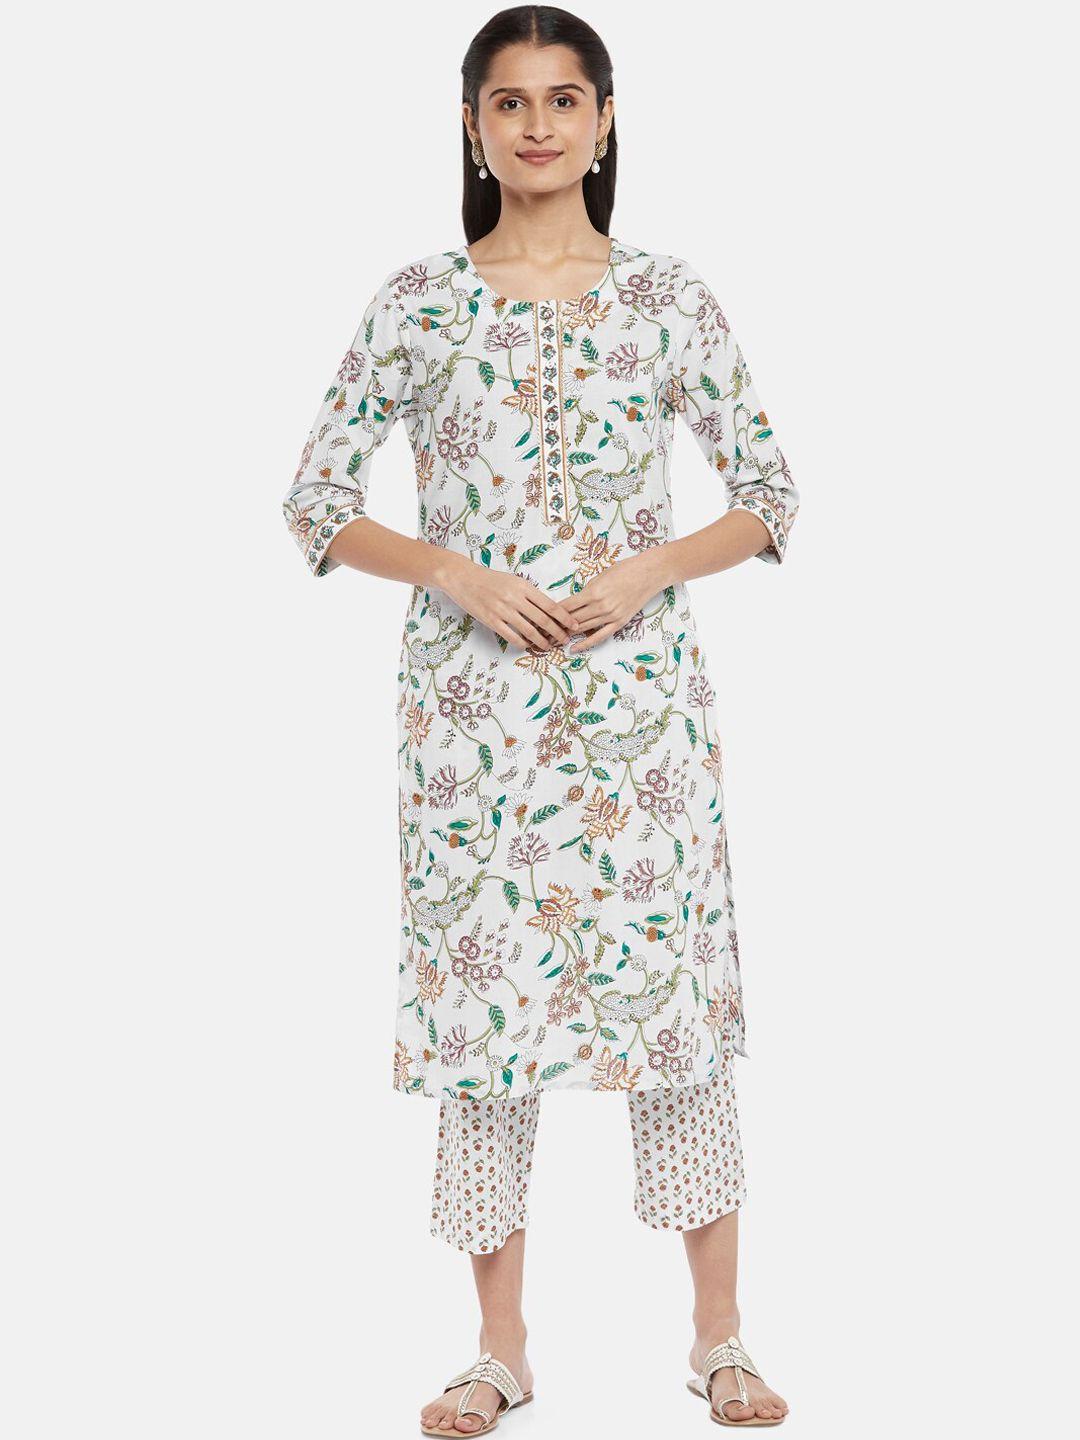 rangmanch by pantaloons women white floral printed pure cotton kurta with trousers